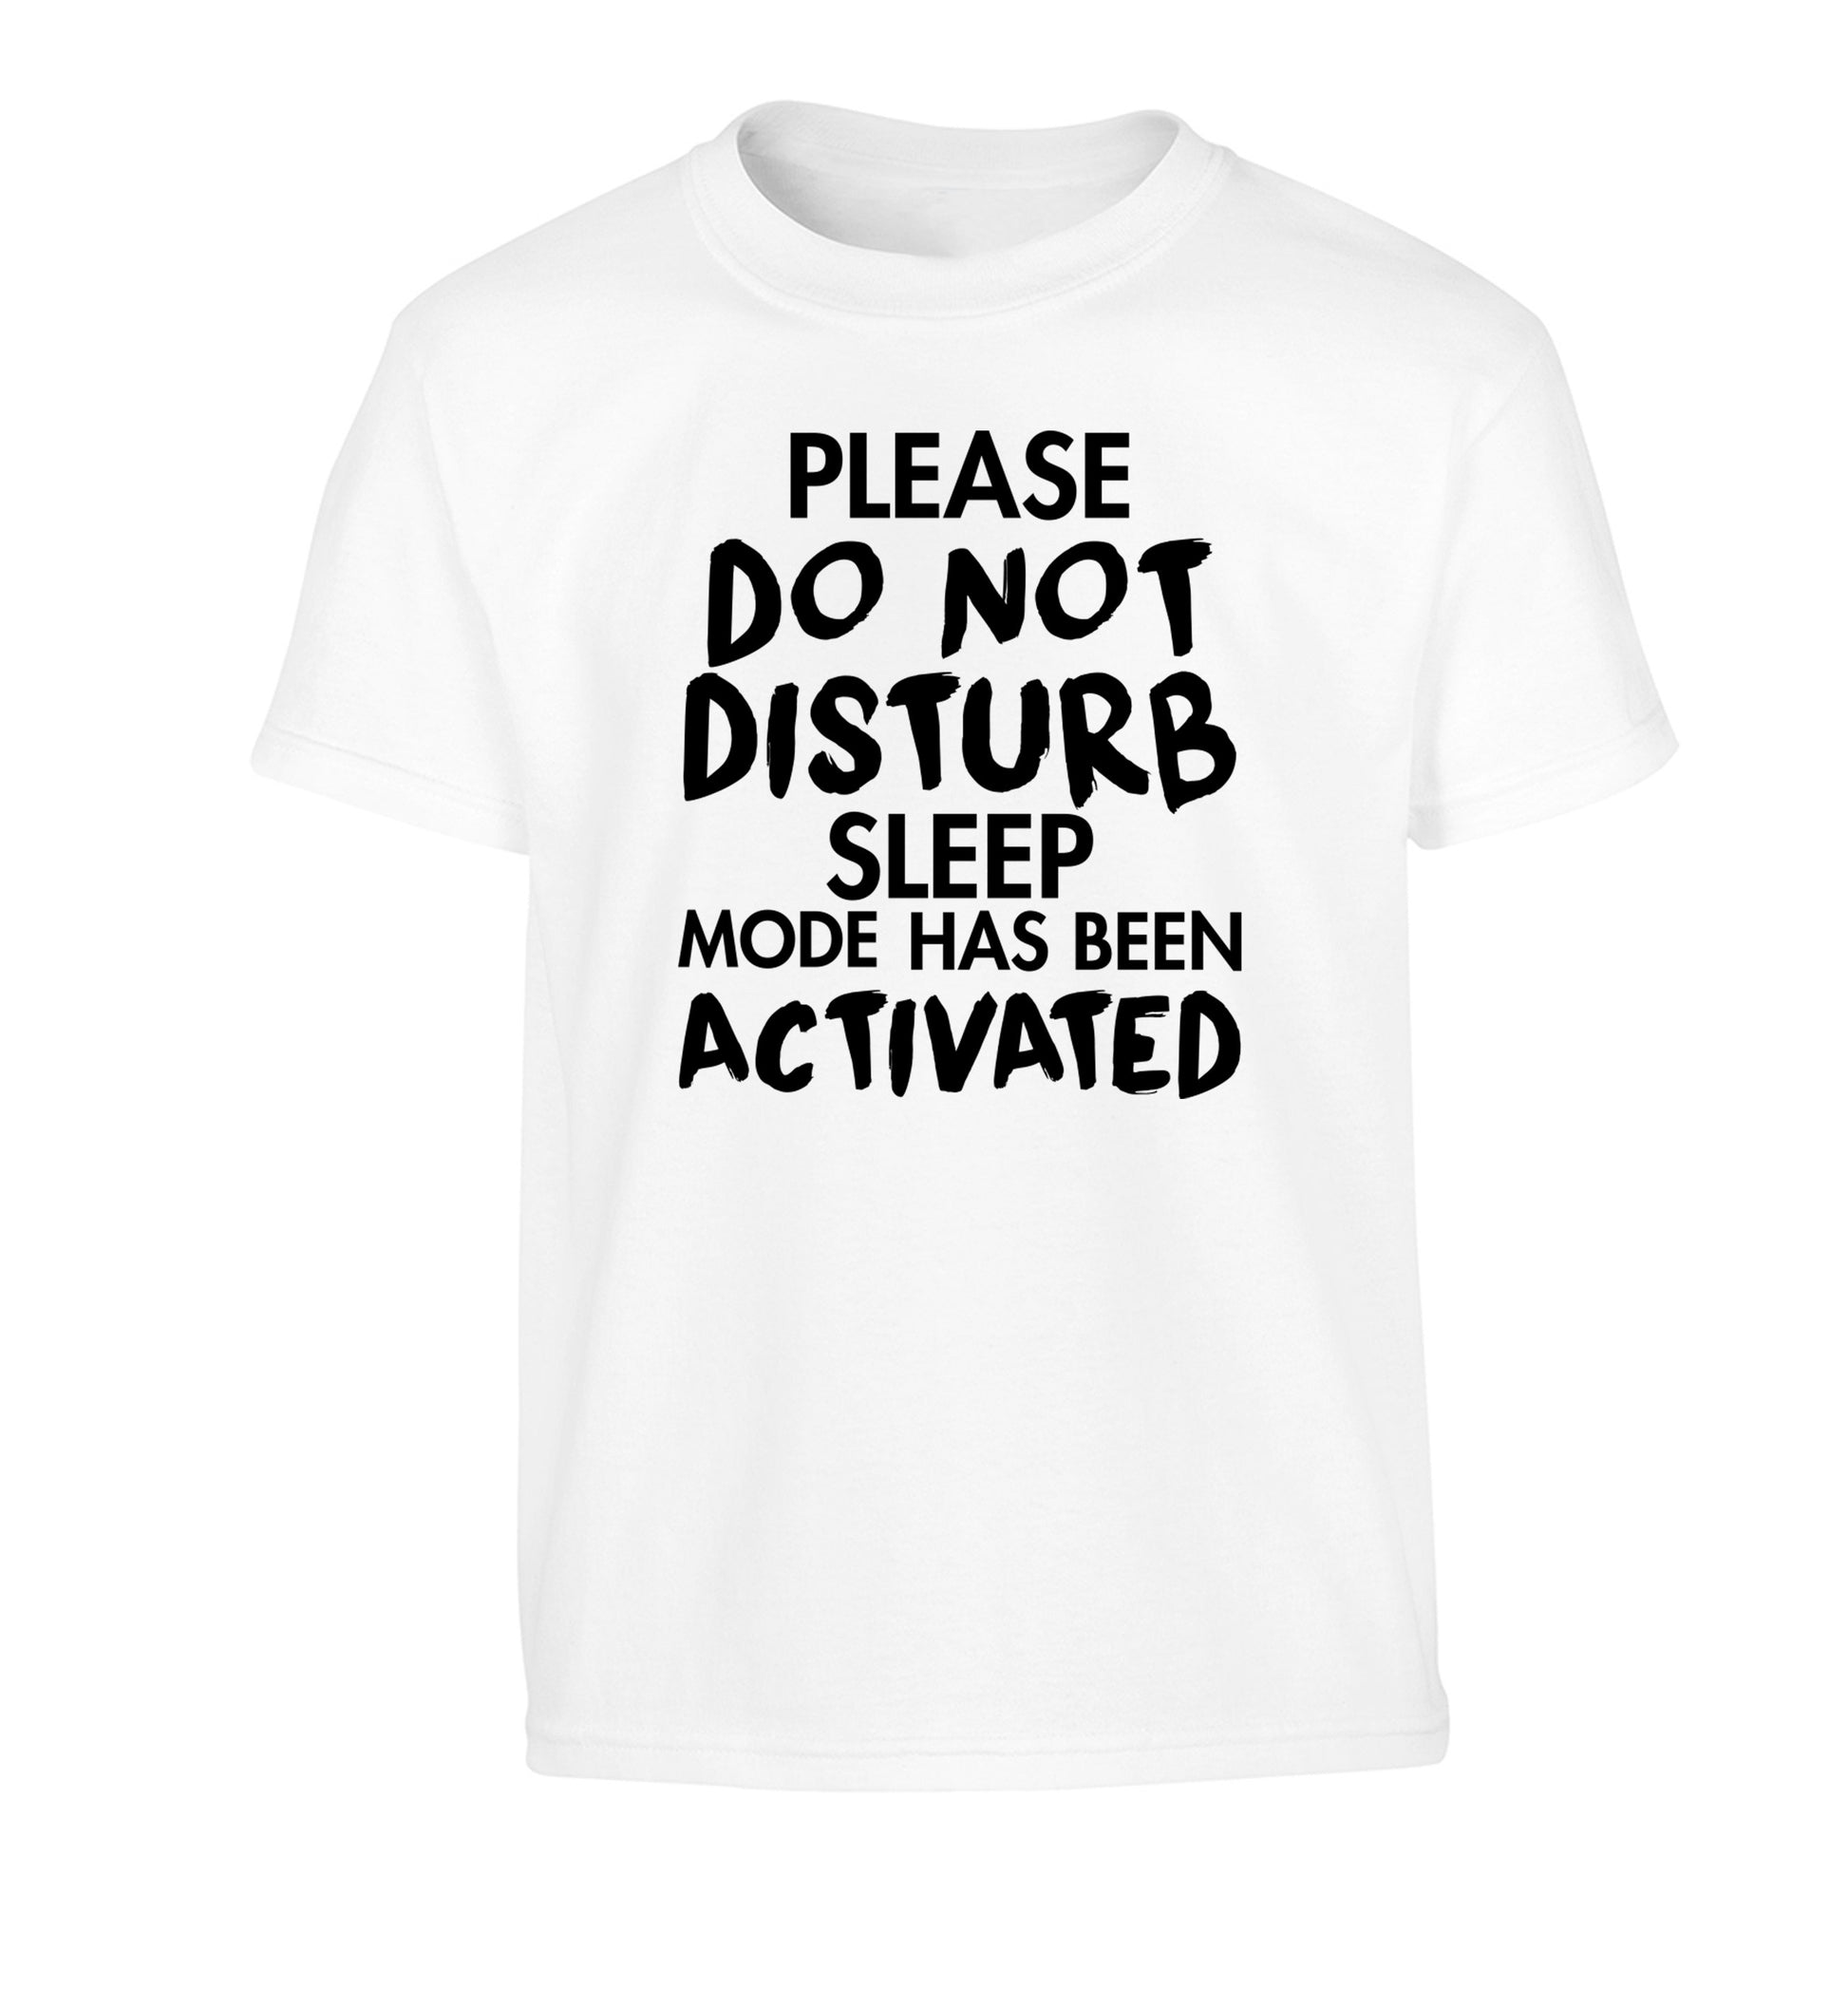 Please do not disturb sleeping mode has been activated Children's white Tshirt 12-14 Years